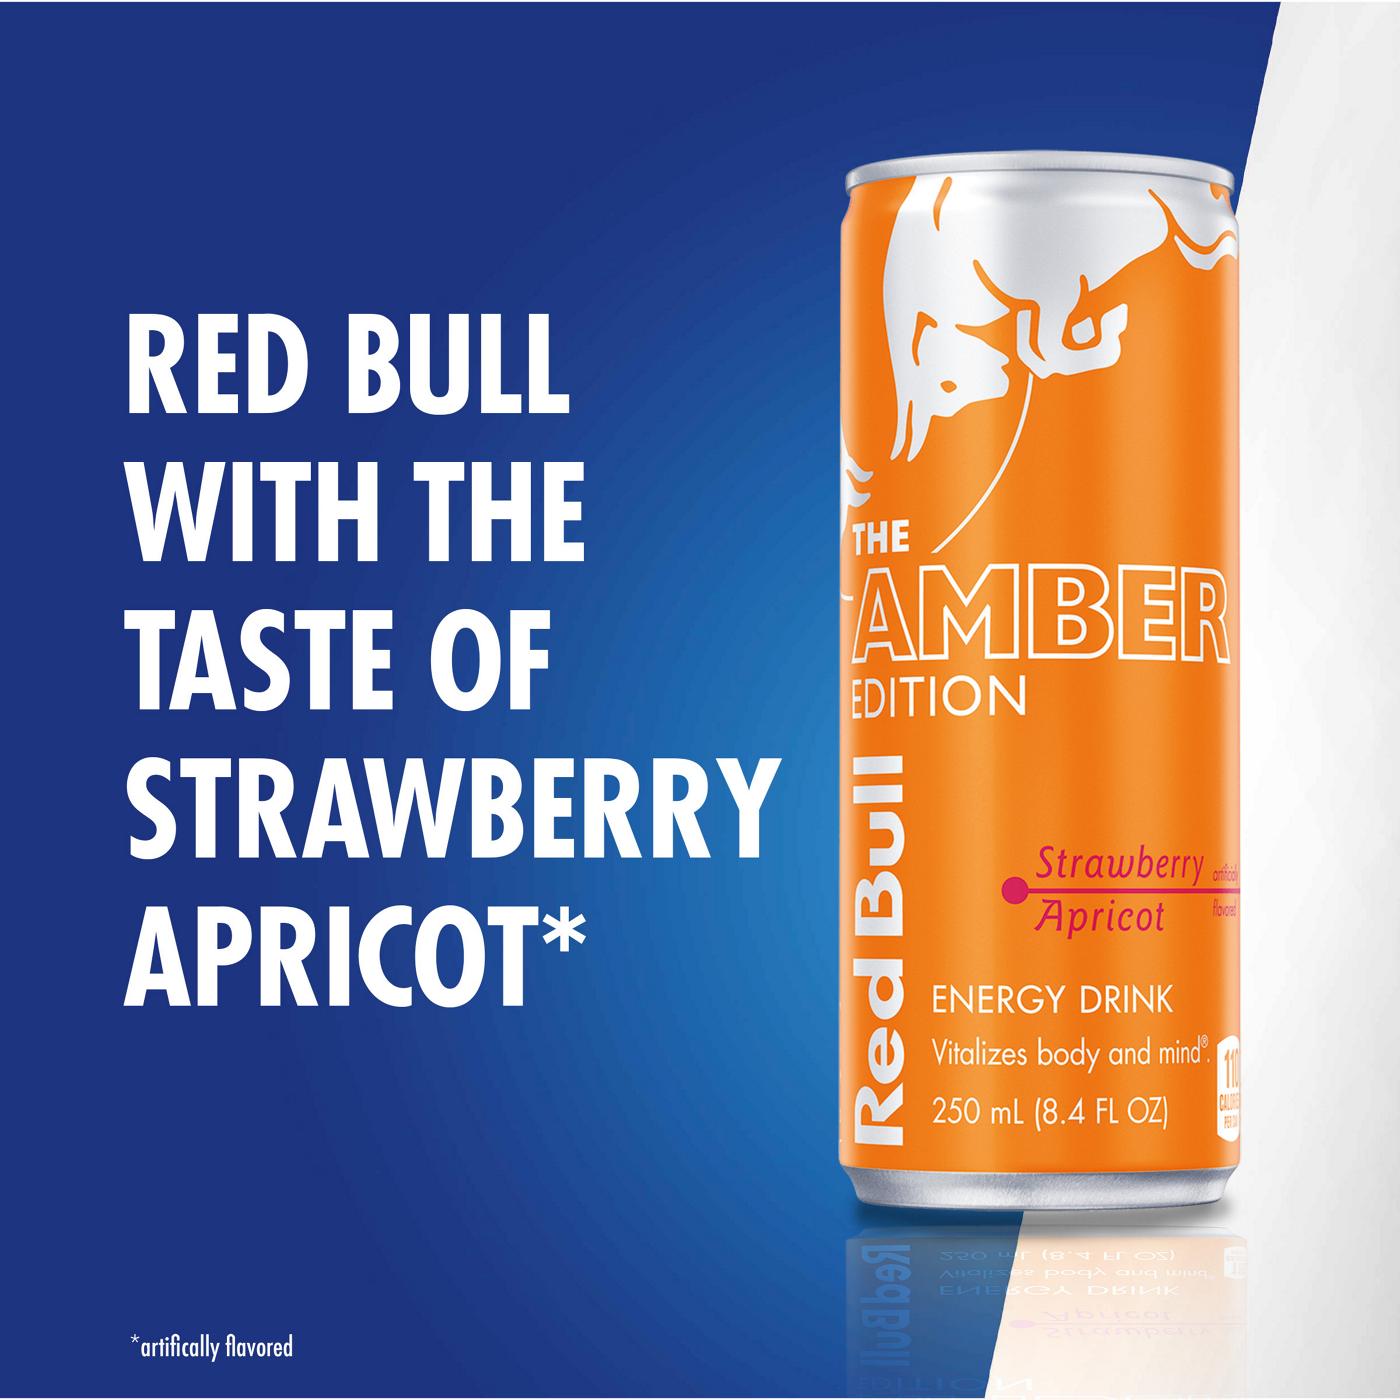 Red Bull The Amber Edition Strawberry Apricot Energy Drink; image 5 of 7